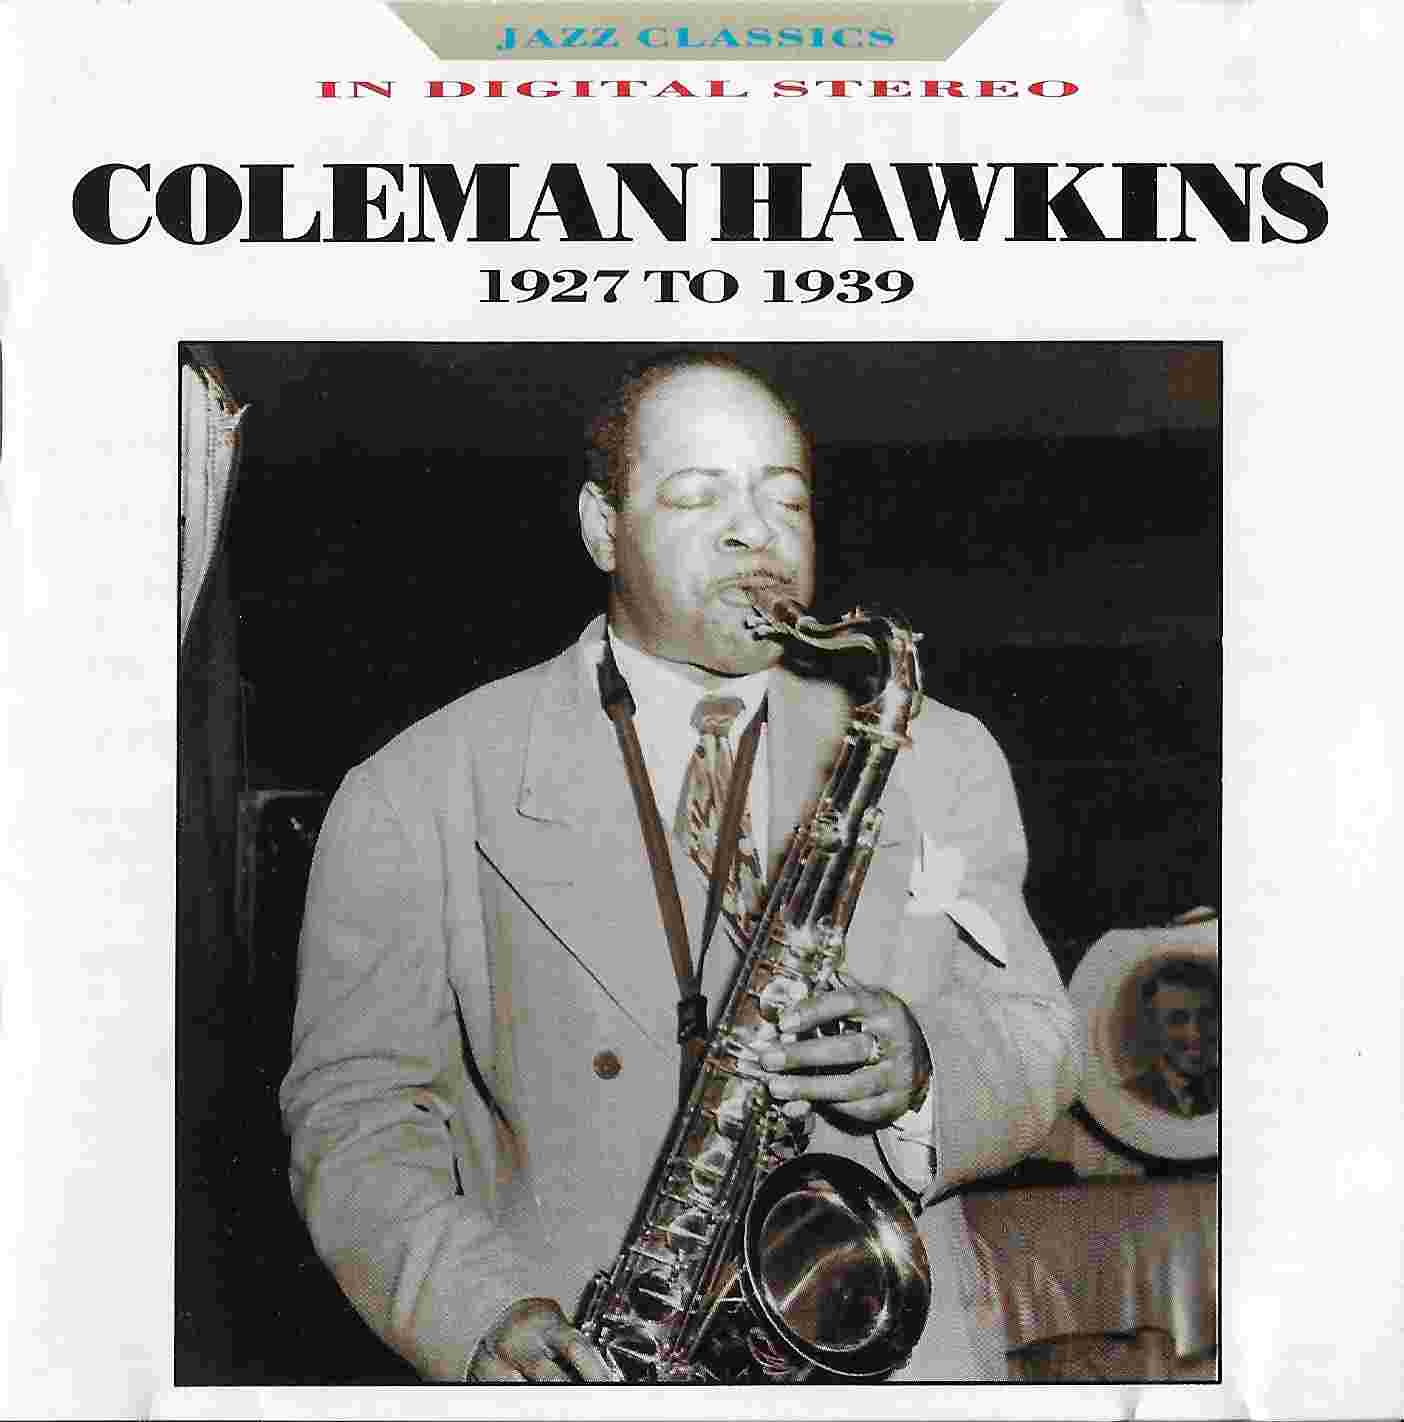 Picture of BBCCD698 Jazz classics - Coleman Hawkins by artist Coleman Hawkins from the BBC cds - Records and Tapes library